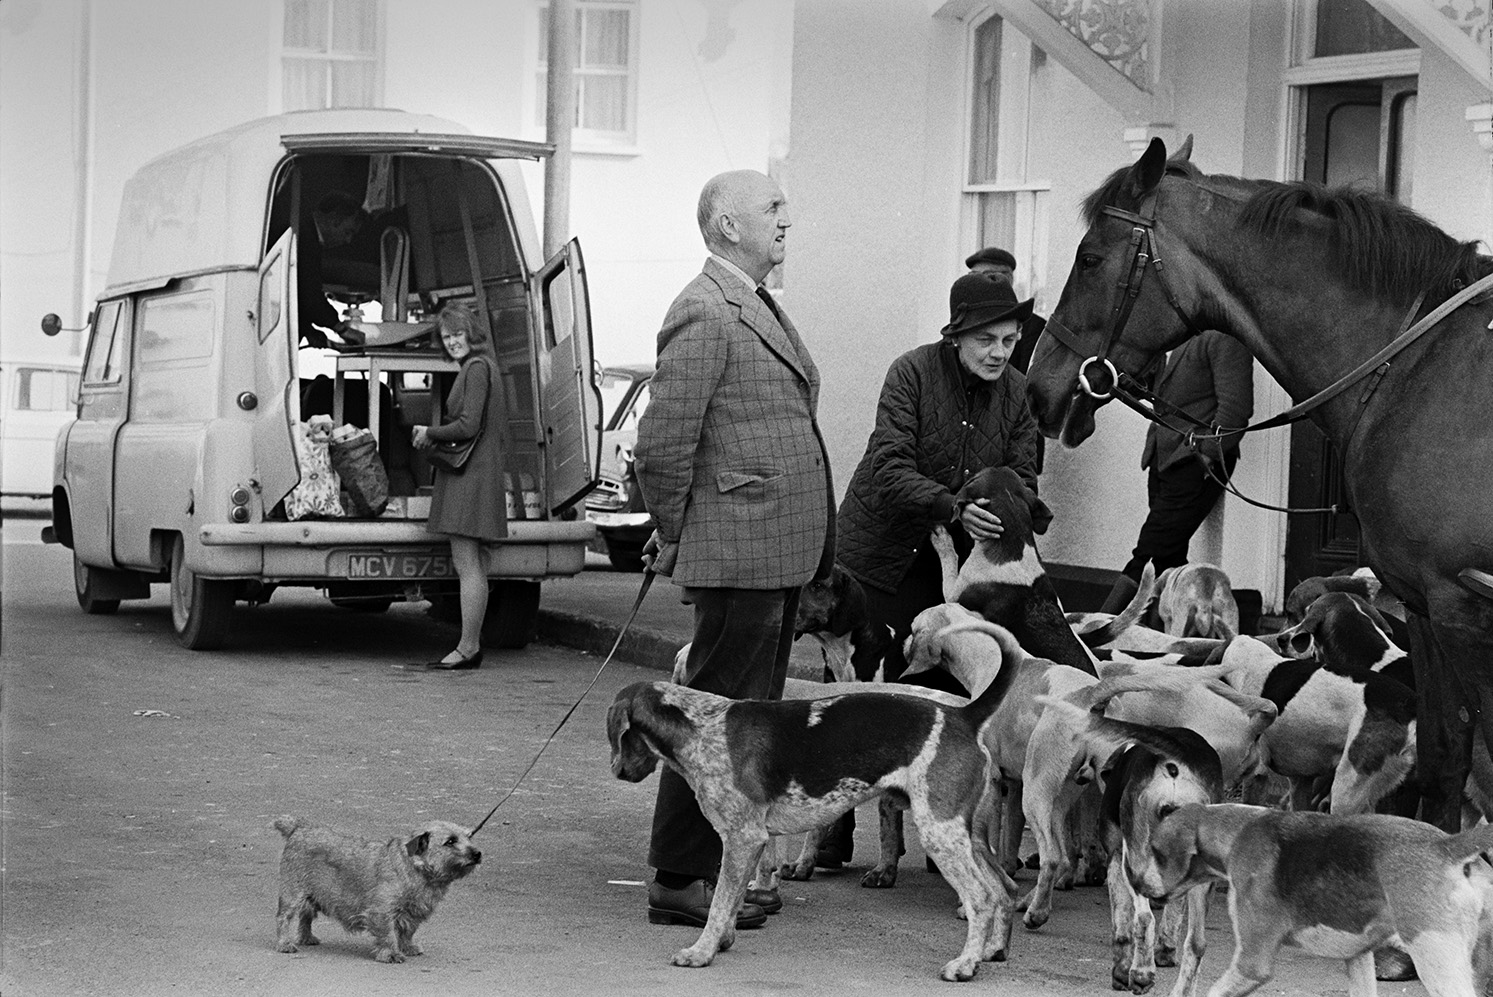 Tiverton Foxhounds hunt meet in village square at Witheridge. Spectators are greeting the hounds and a mounted huntsman. The man has a dog with him. A woman is getting items out of a van parked in the square in the background.